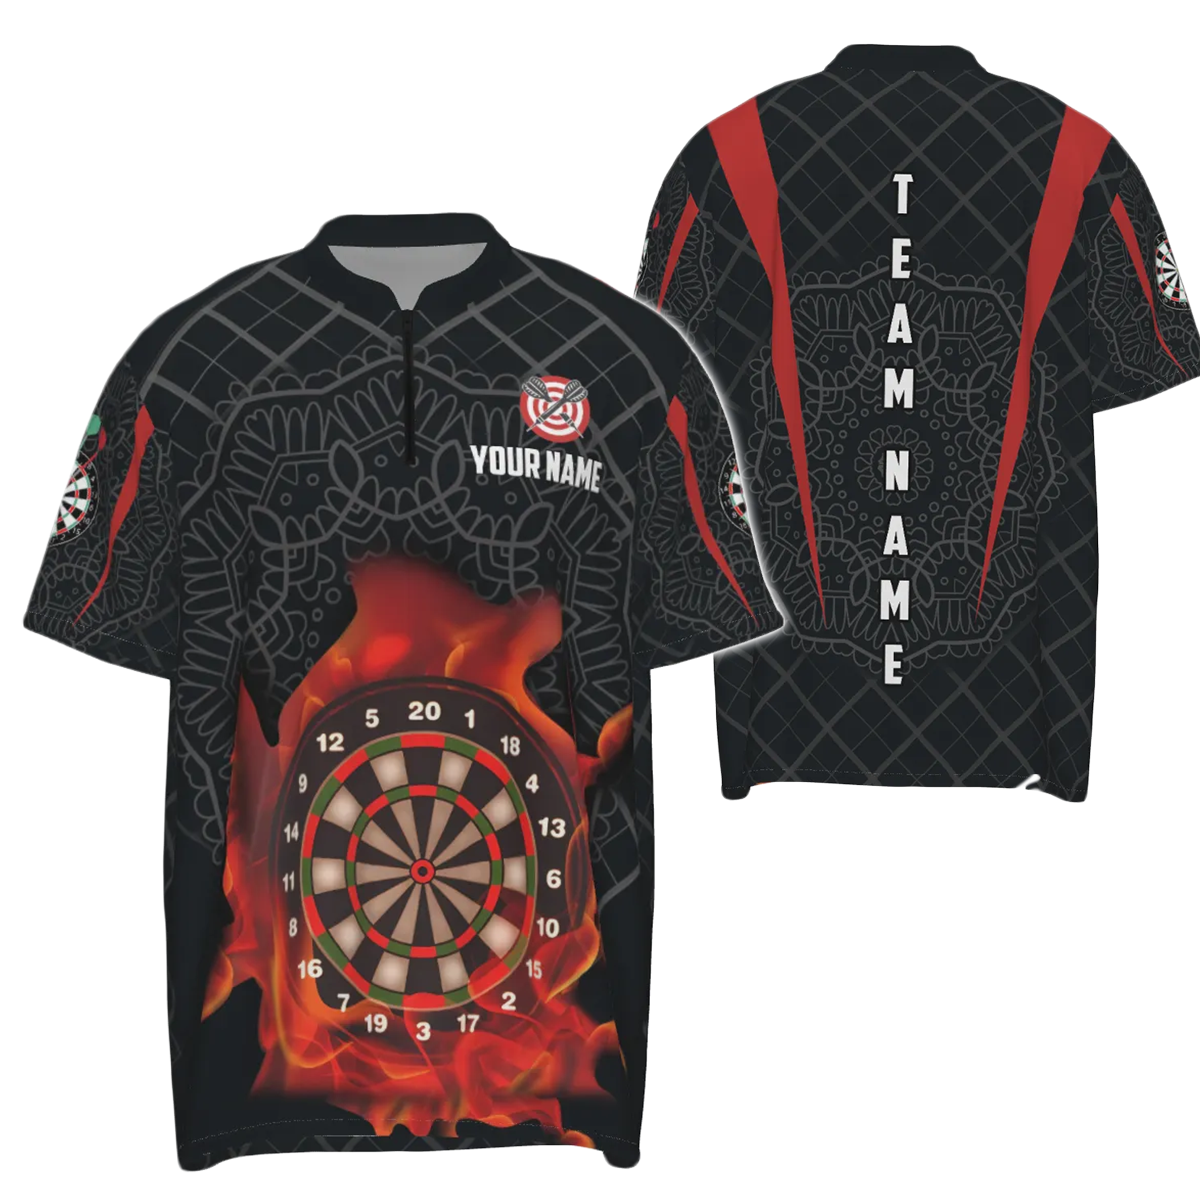 Men's Dart Shirt with Celtic Pattern and Flame Darts - Dart Jersey y565